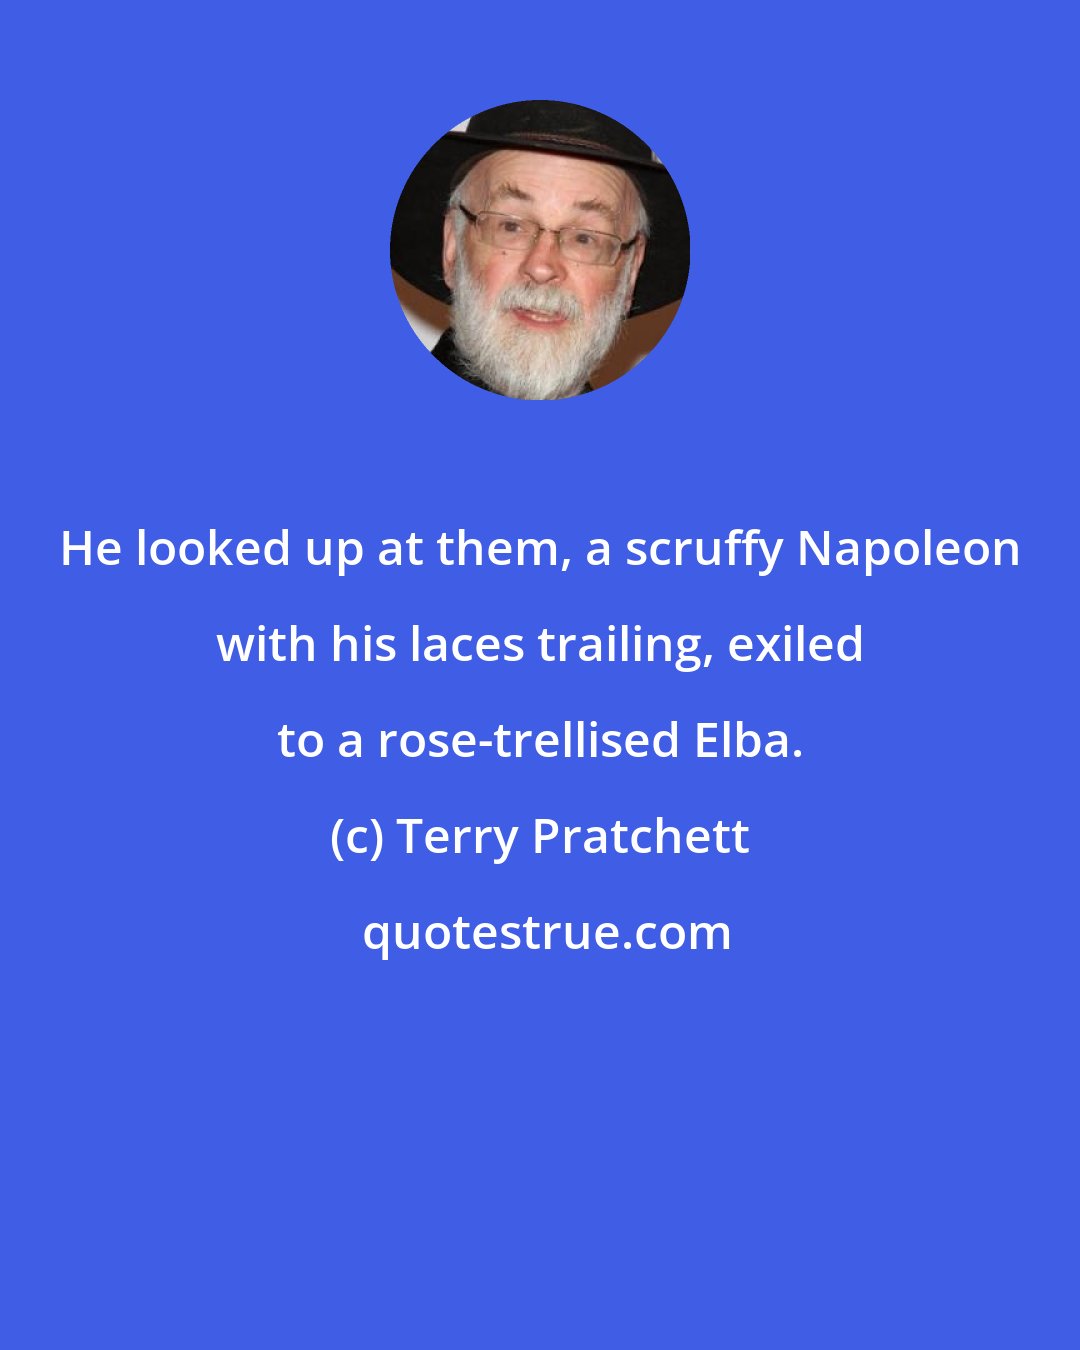 Terry Pratchett: He looked up at them, a scruffy Napoleon with his laces trailing, exiled to a rose-trellised Elba.